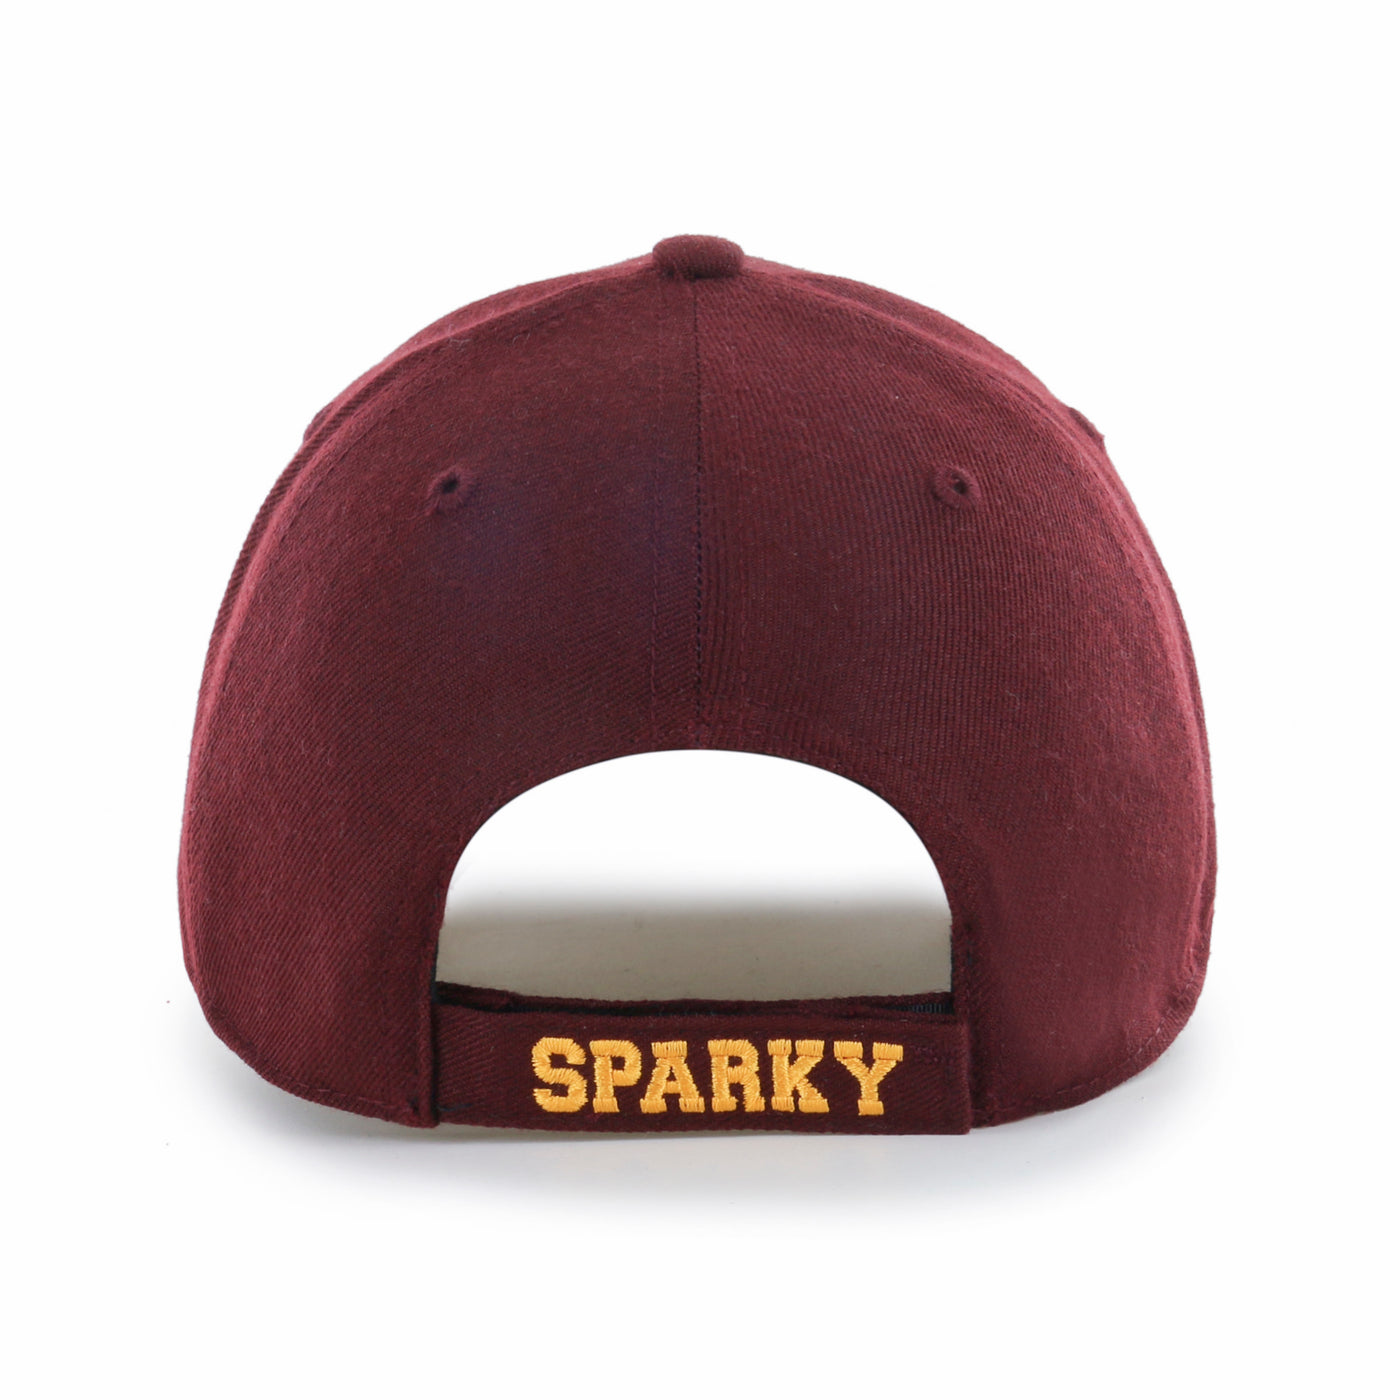 back of ASU hat with sparky embroidered on strap